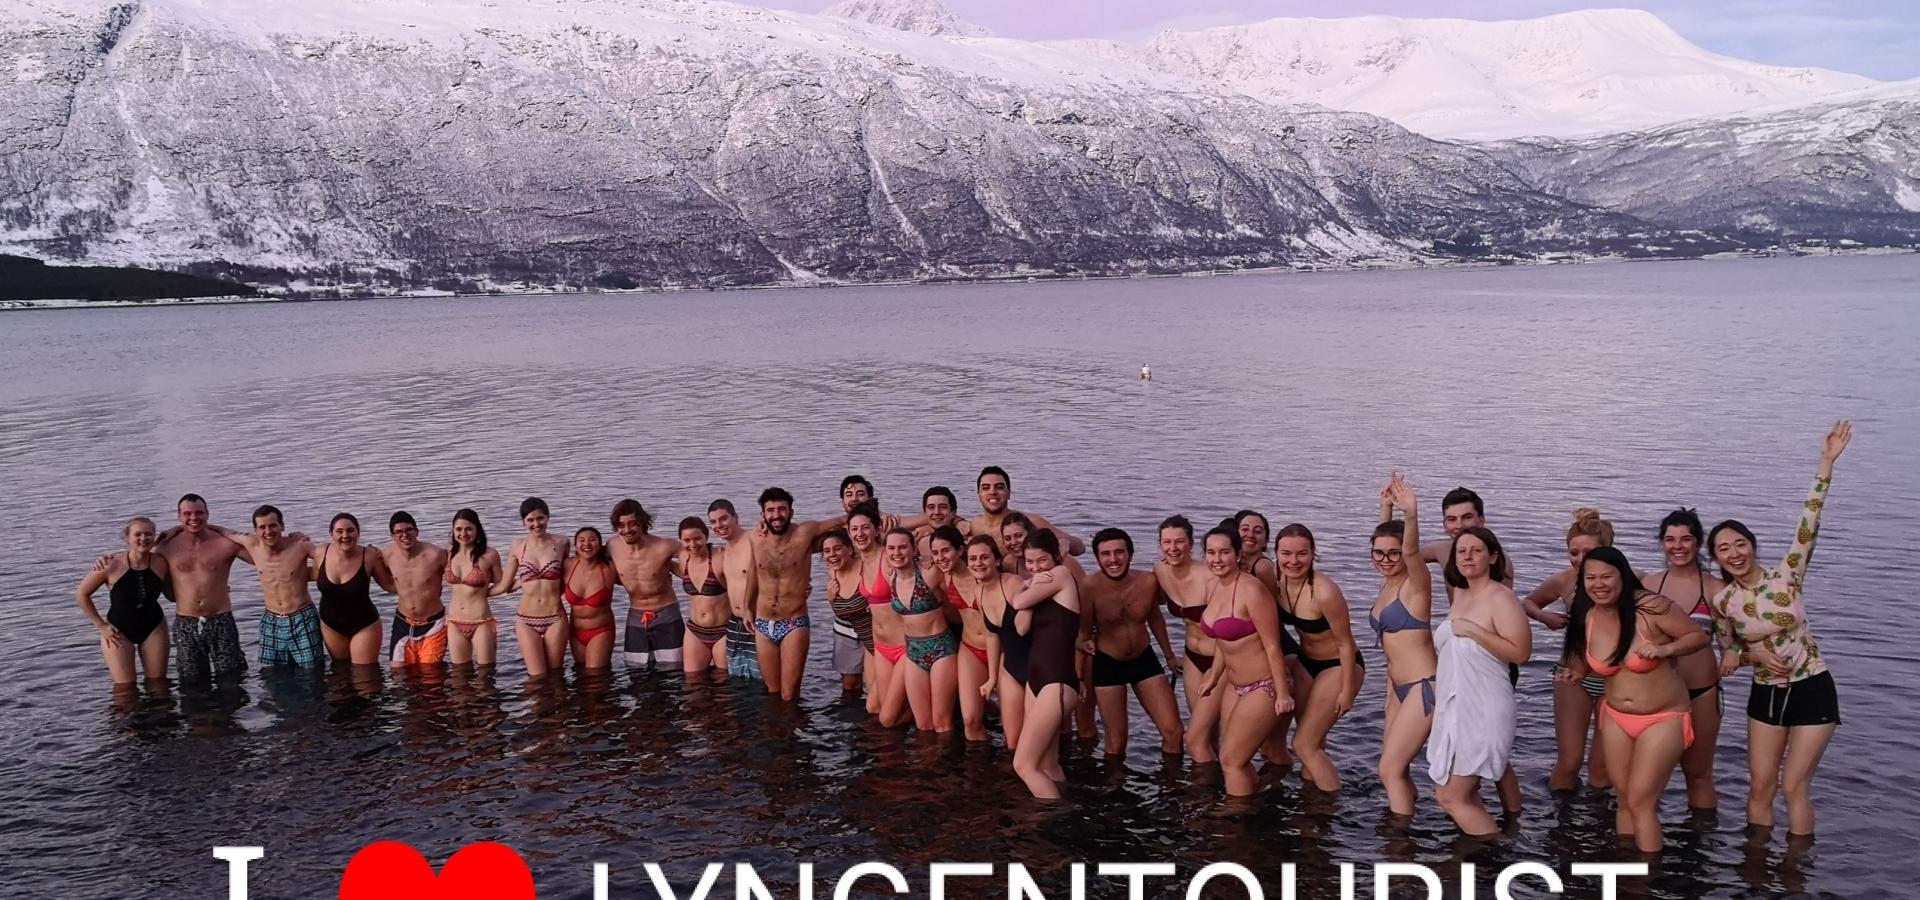 Lyngen Tourist is famous for arctic swimming